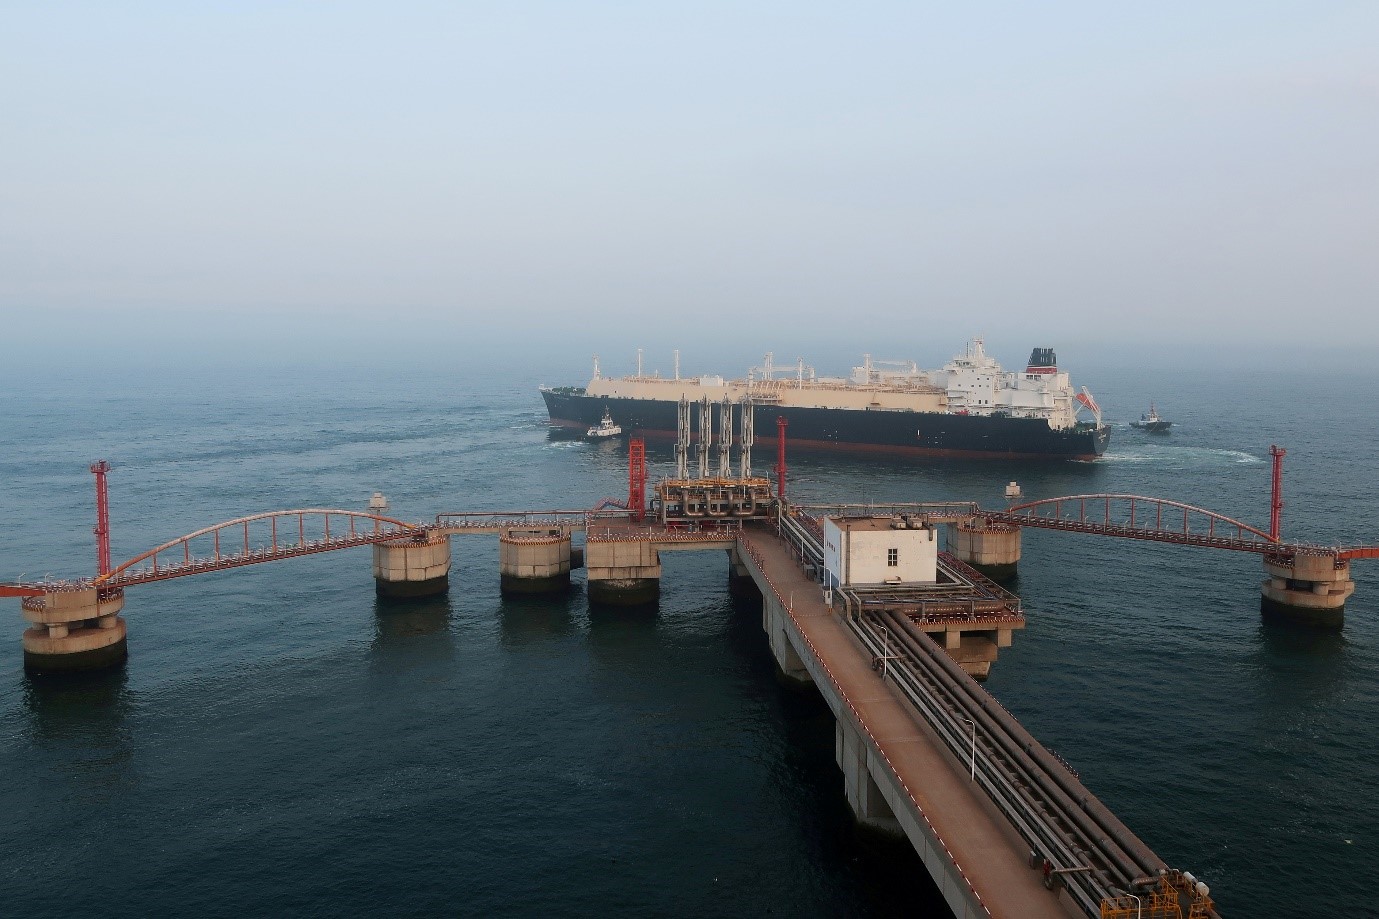 Reuters exclusively reports China looking to lock in U.S. liquefied natural gas in energy crunch